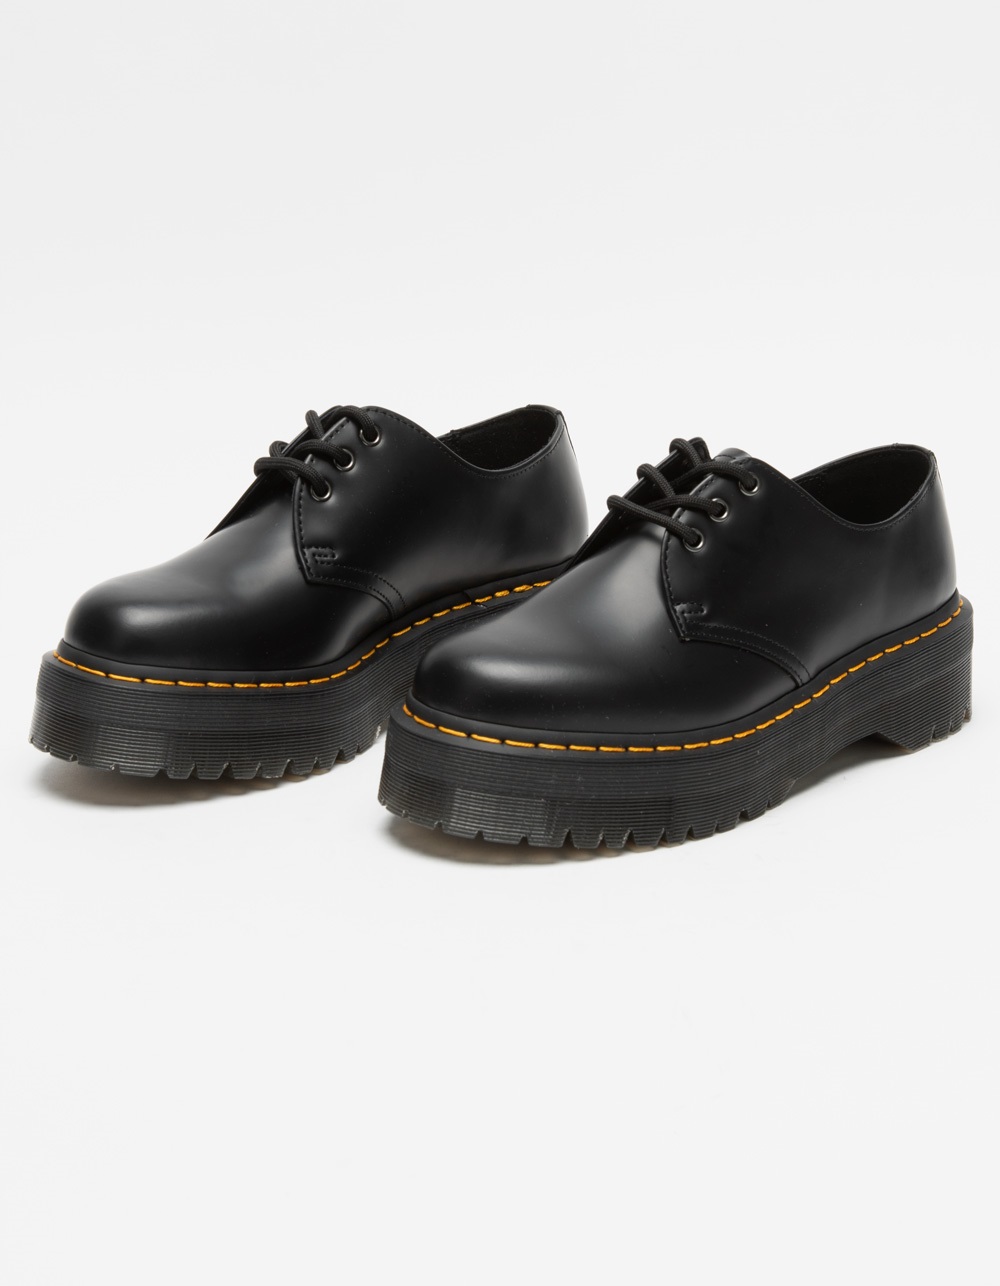 1461 Smooth Leather Oxford Shoes Martens | lupon.gov.ph